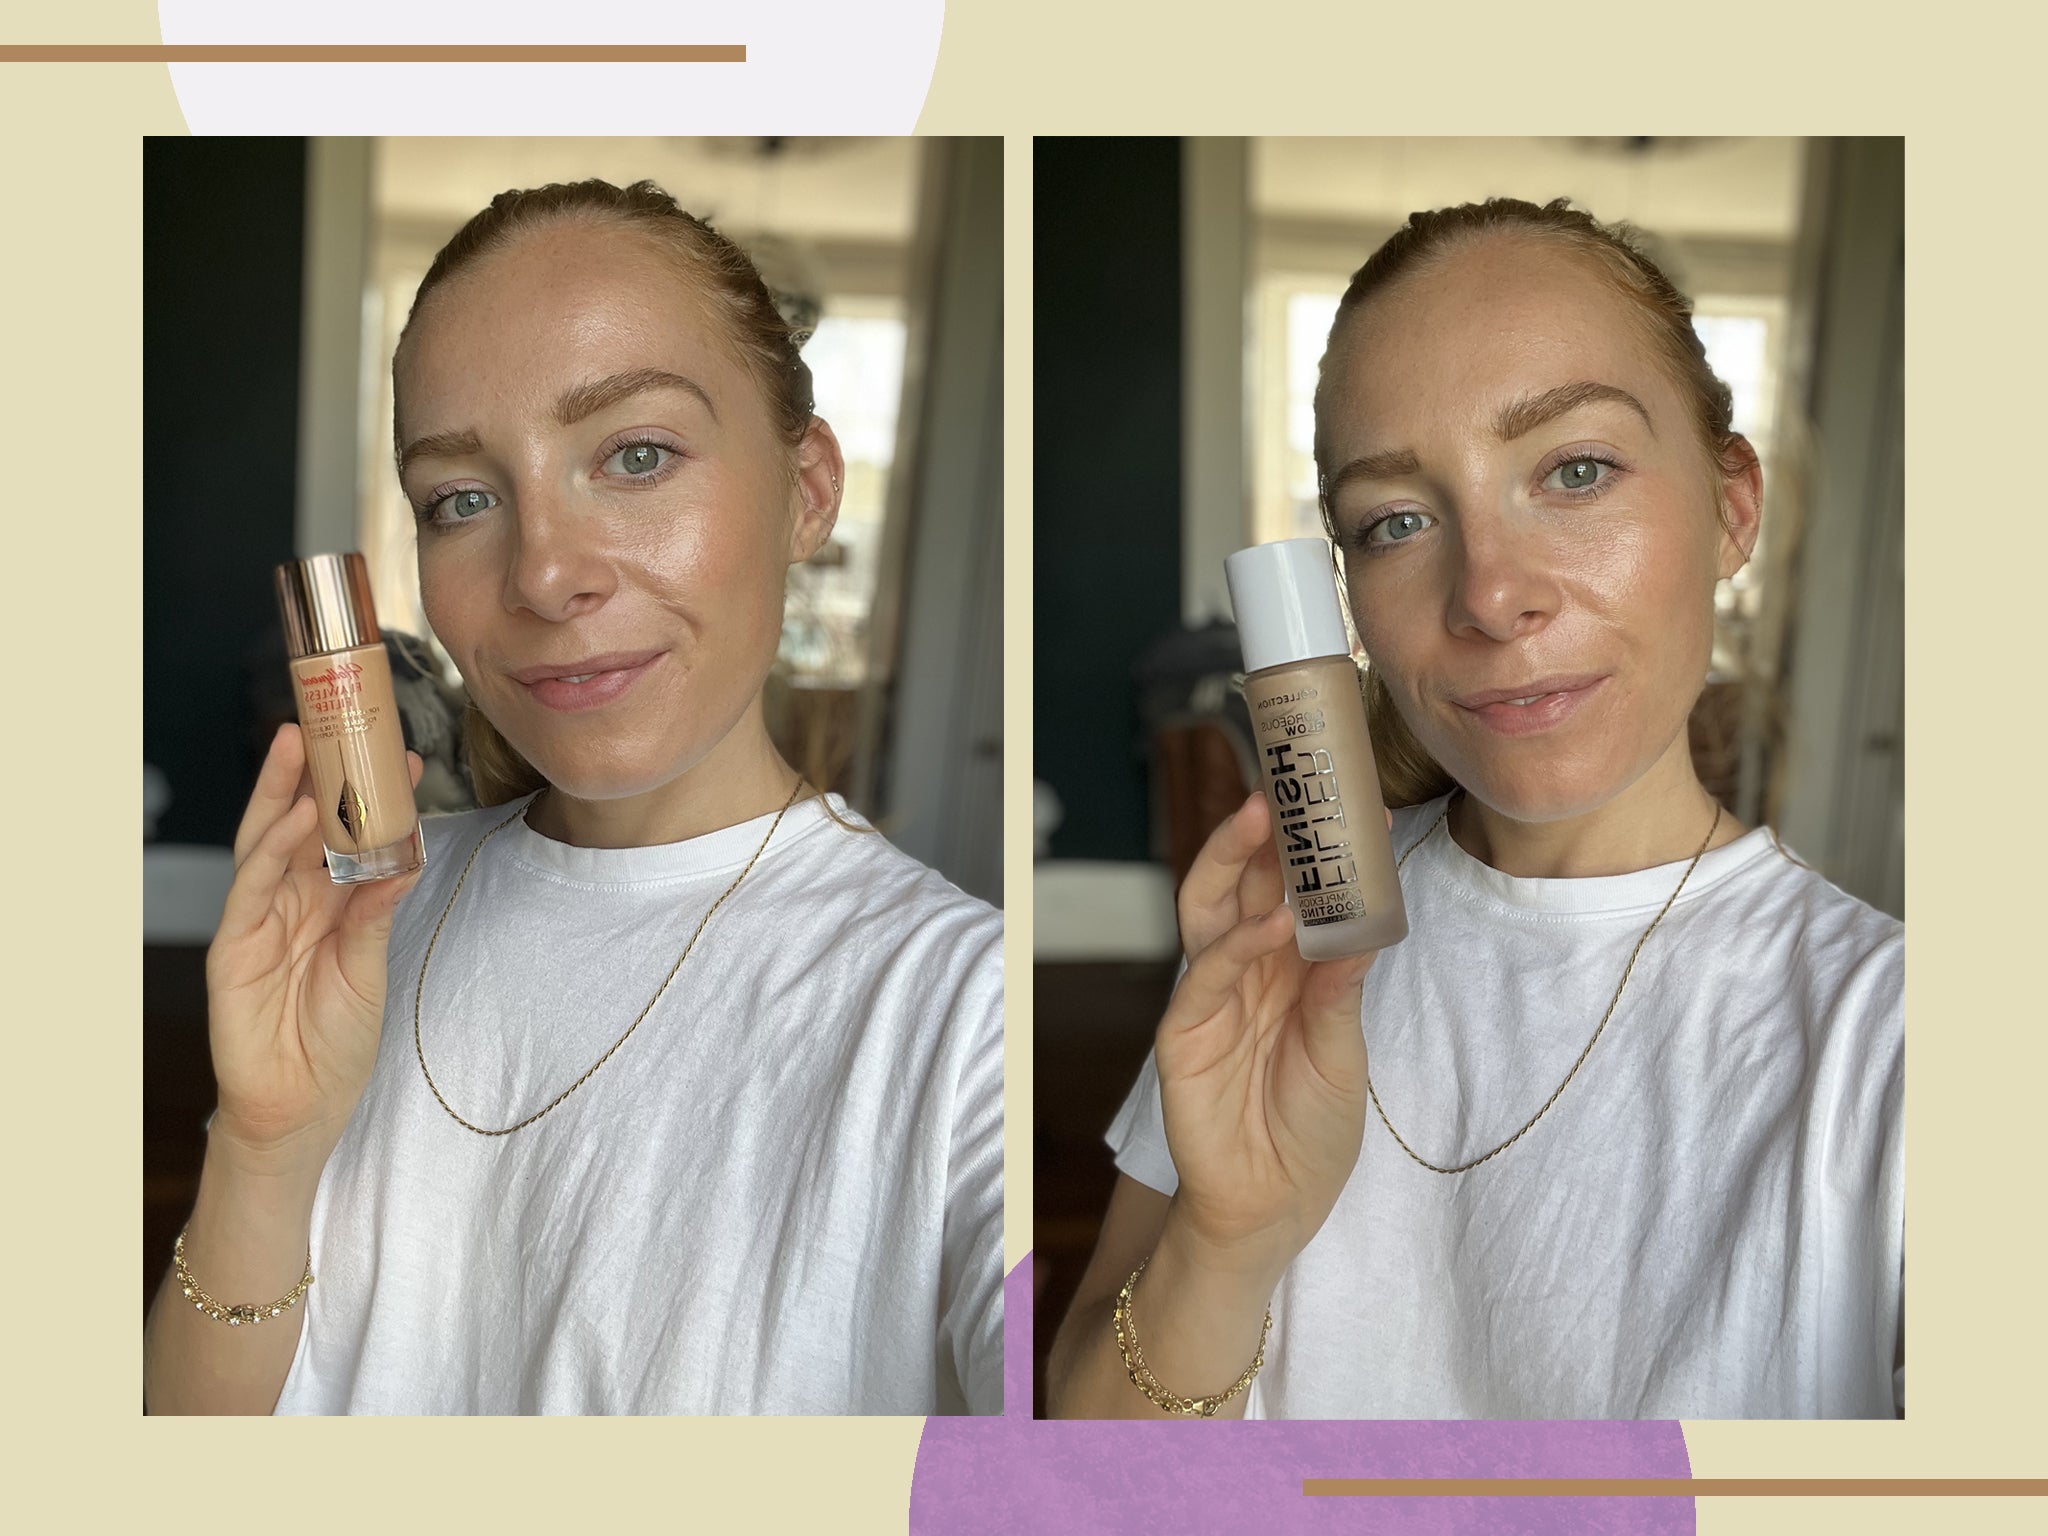 Charlotte Tilbury flawless filter vs Collection dupe, review